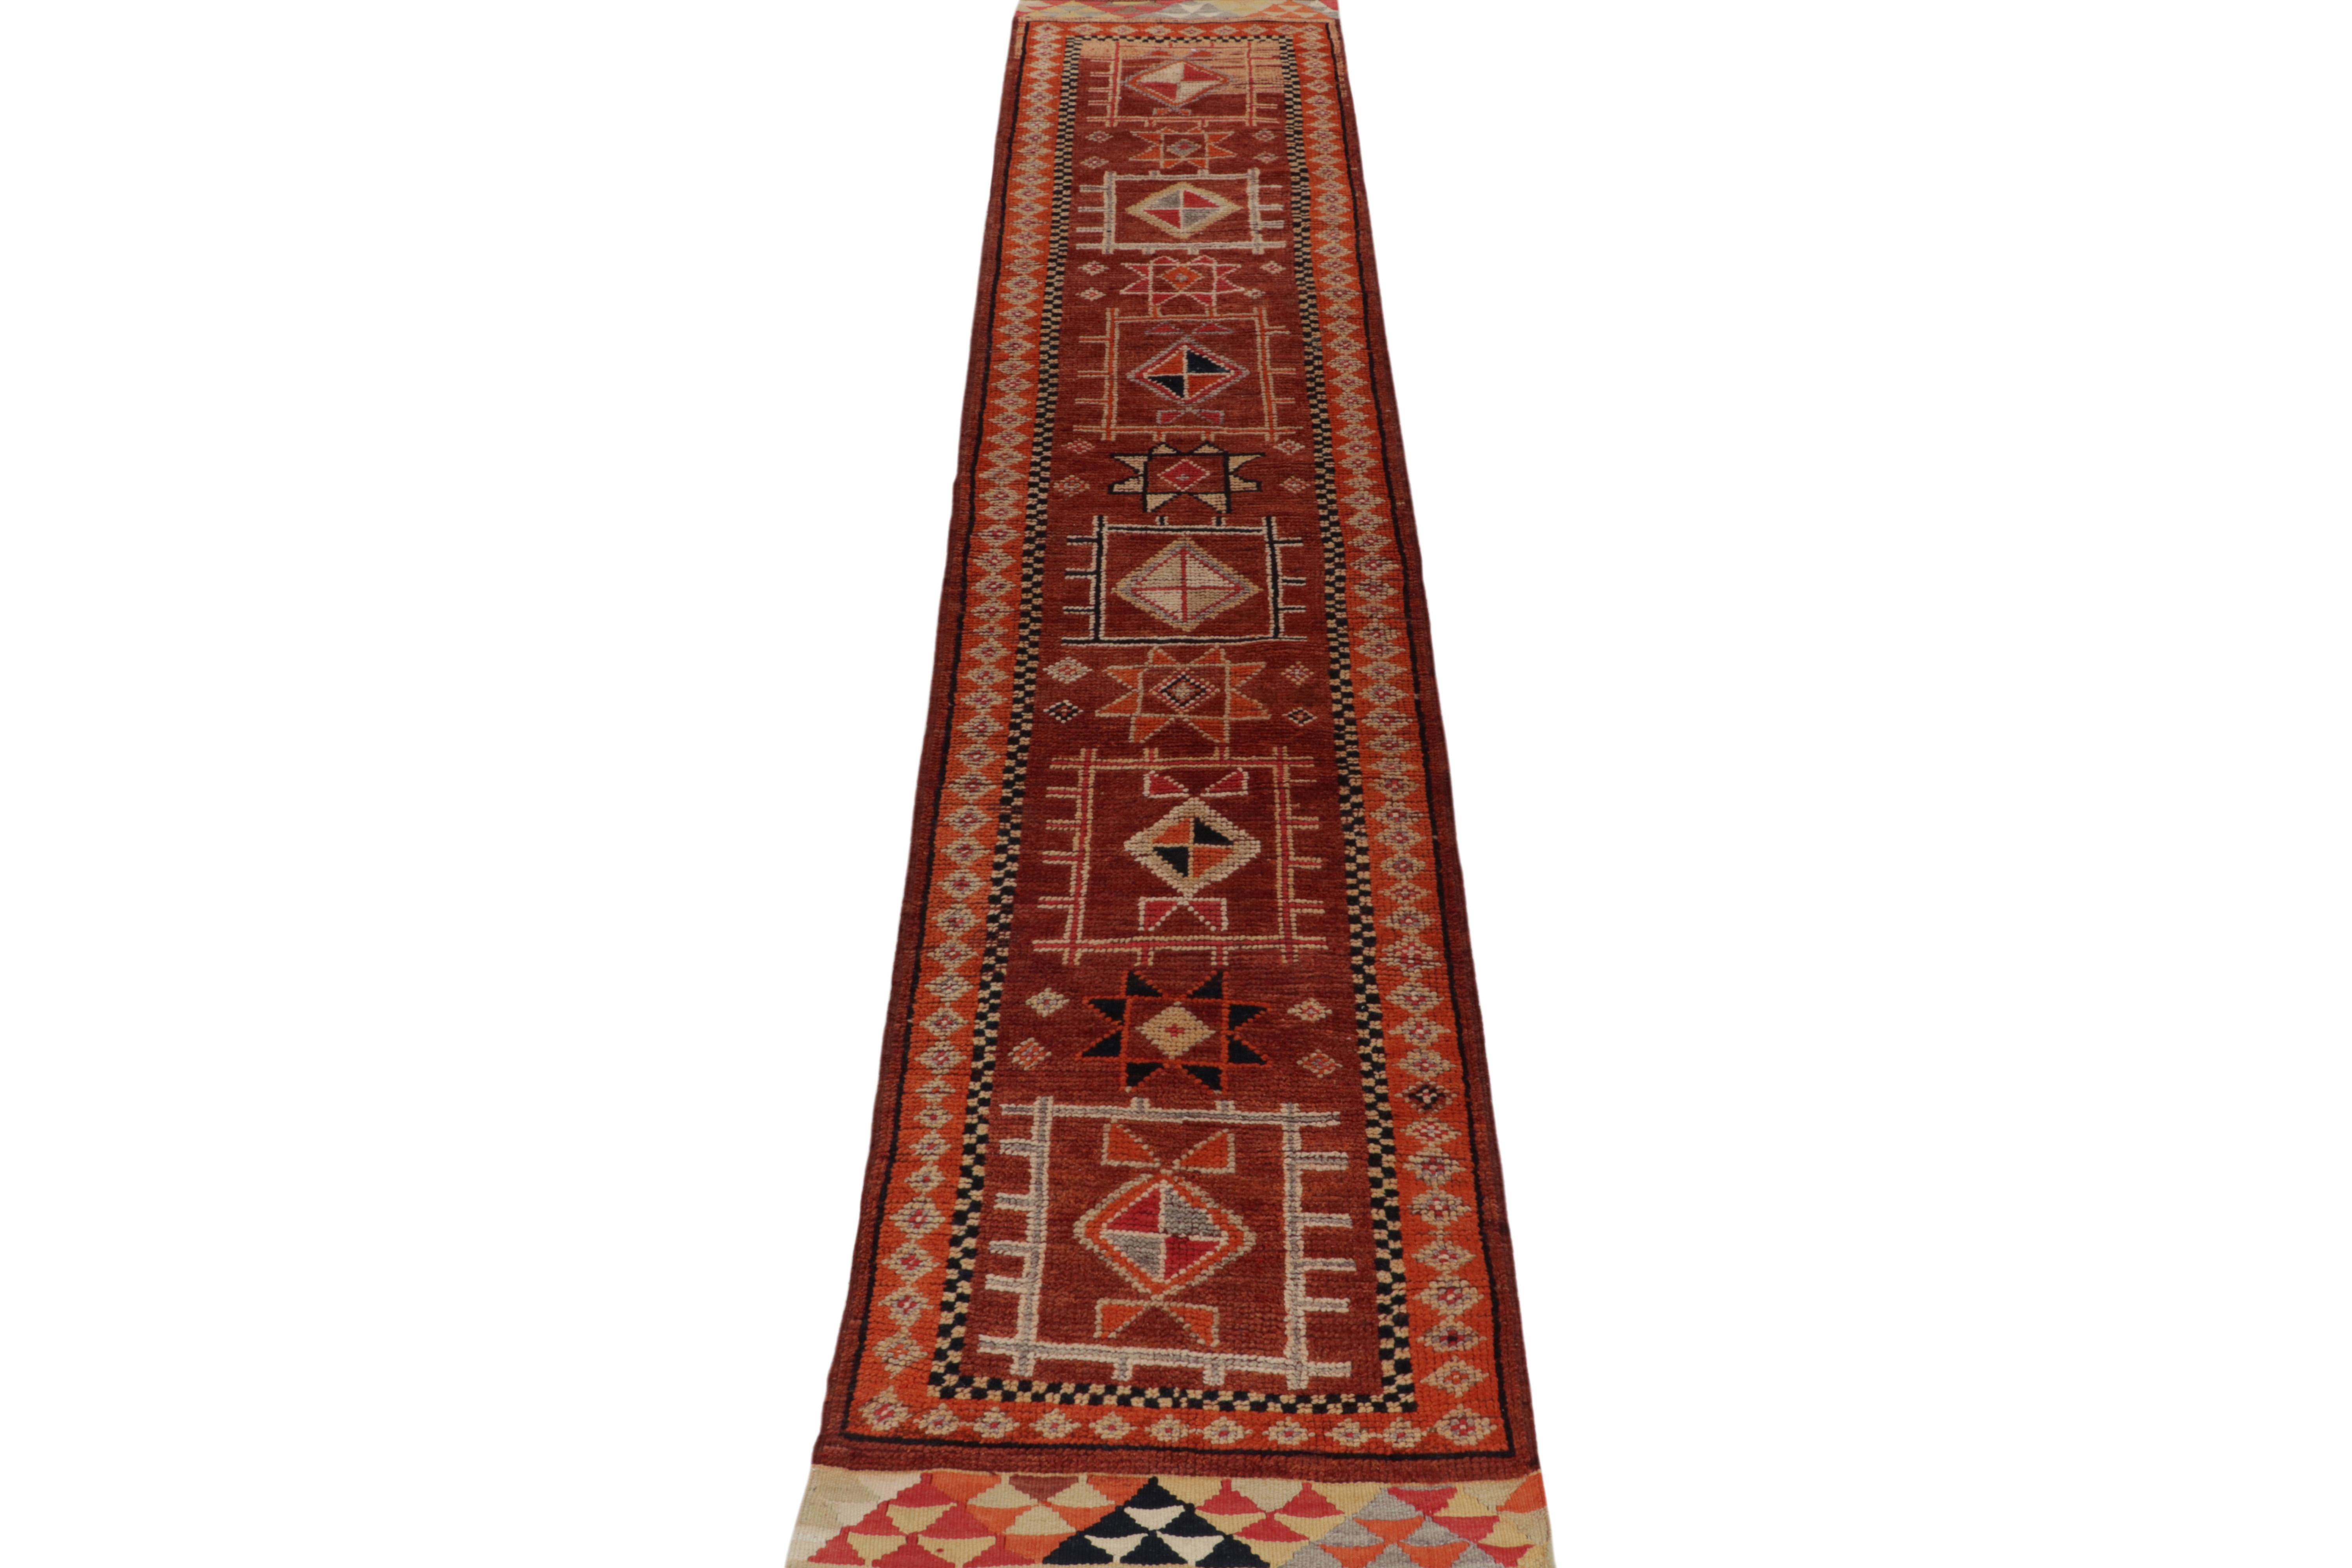 From a rare new curation by Rug & Kilim, a 3x14 vintage tribal runner, hand-knotted in wool circa 1950-1960.

Tasteful & inviting tones of rust red, orange & brown enjoy black accents in a series of classic medallions and similar geometric